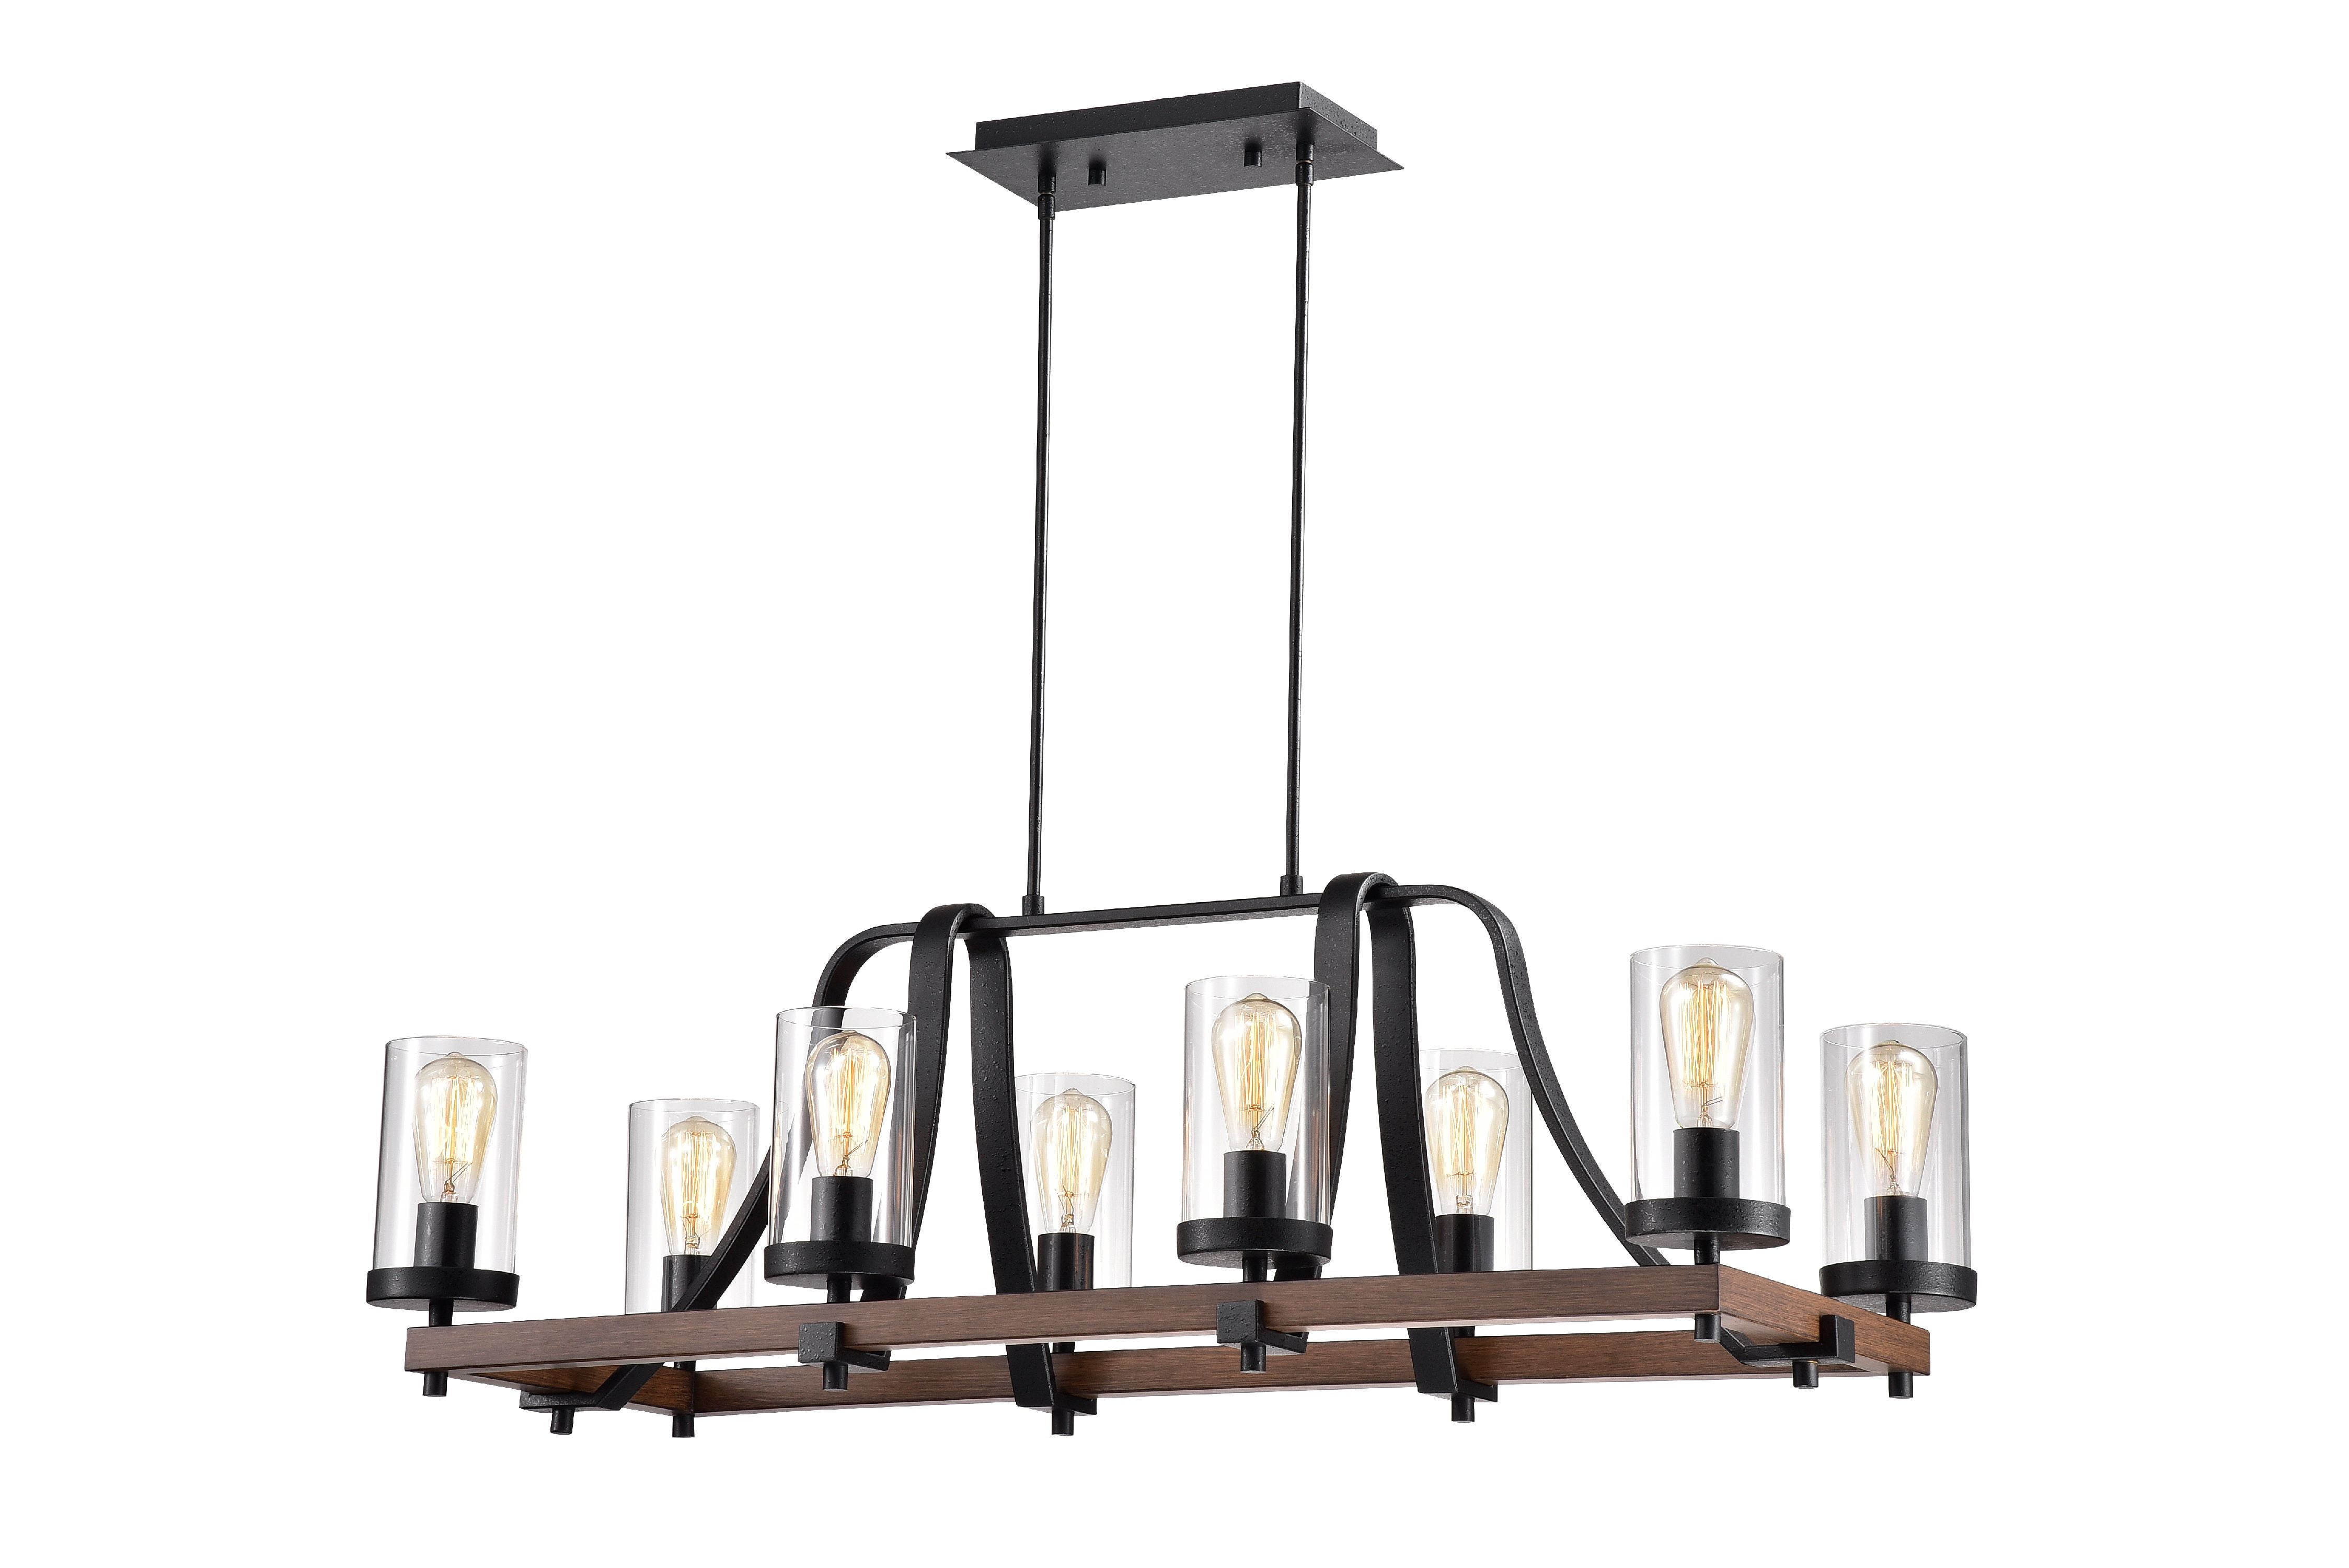 Guntel Forged Metal Multi-Light Chandelier with Glass Pillar Shades (6 OR 8 lamps)